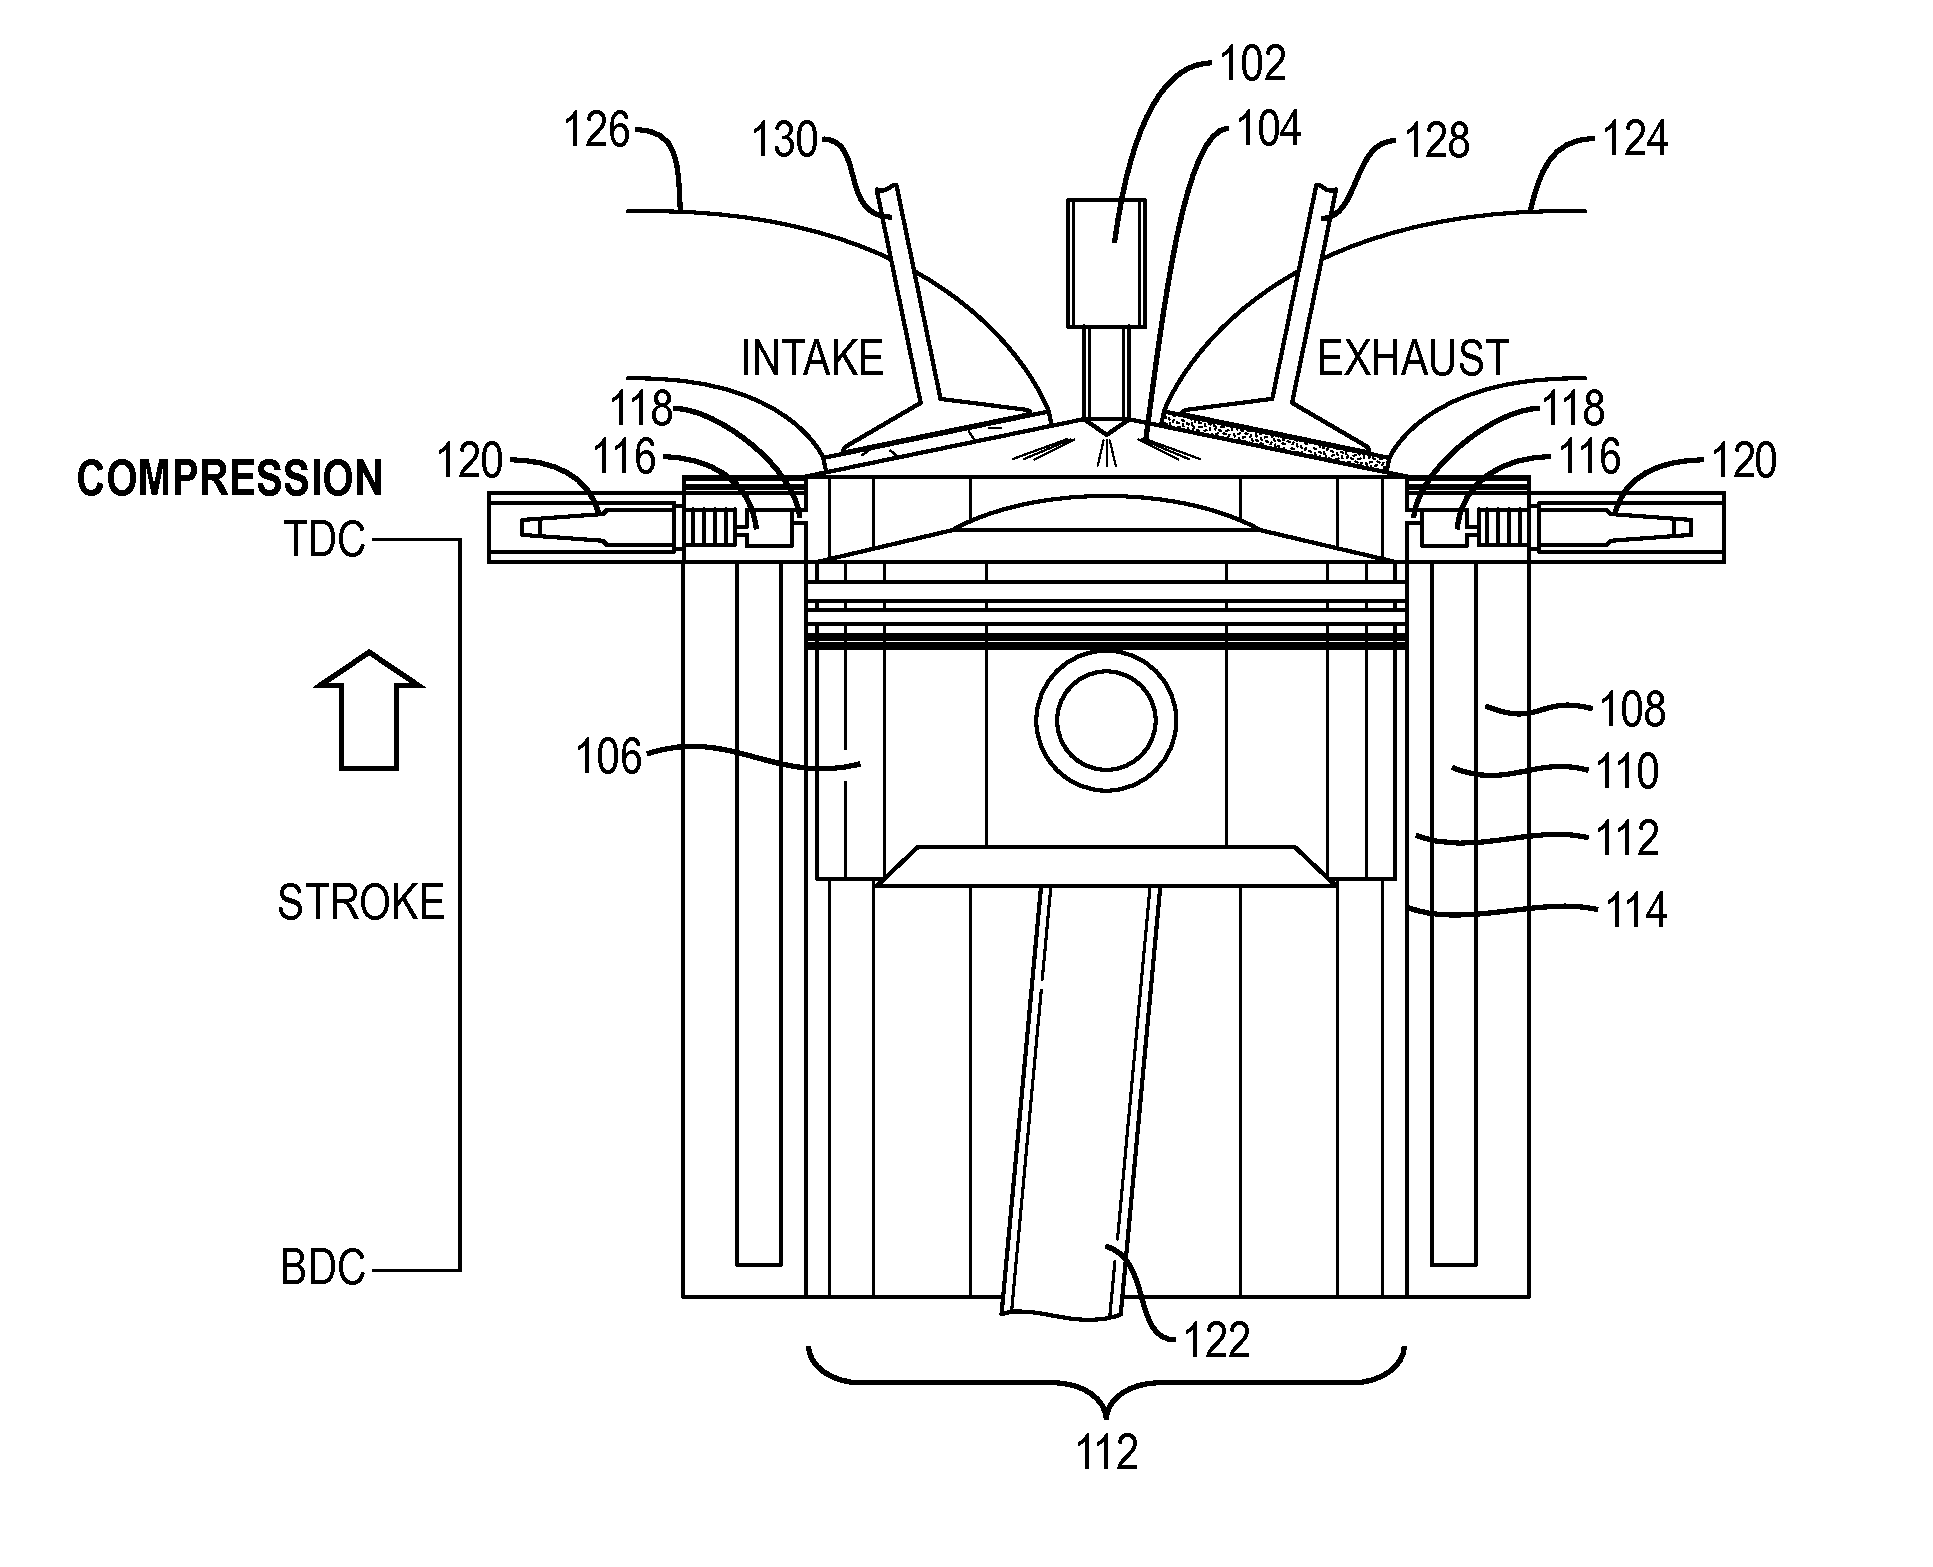 Dual pre-chamber combustion system